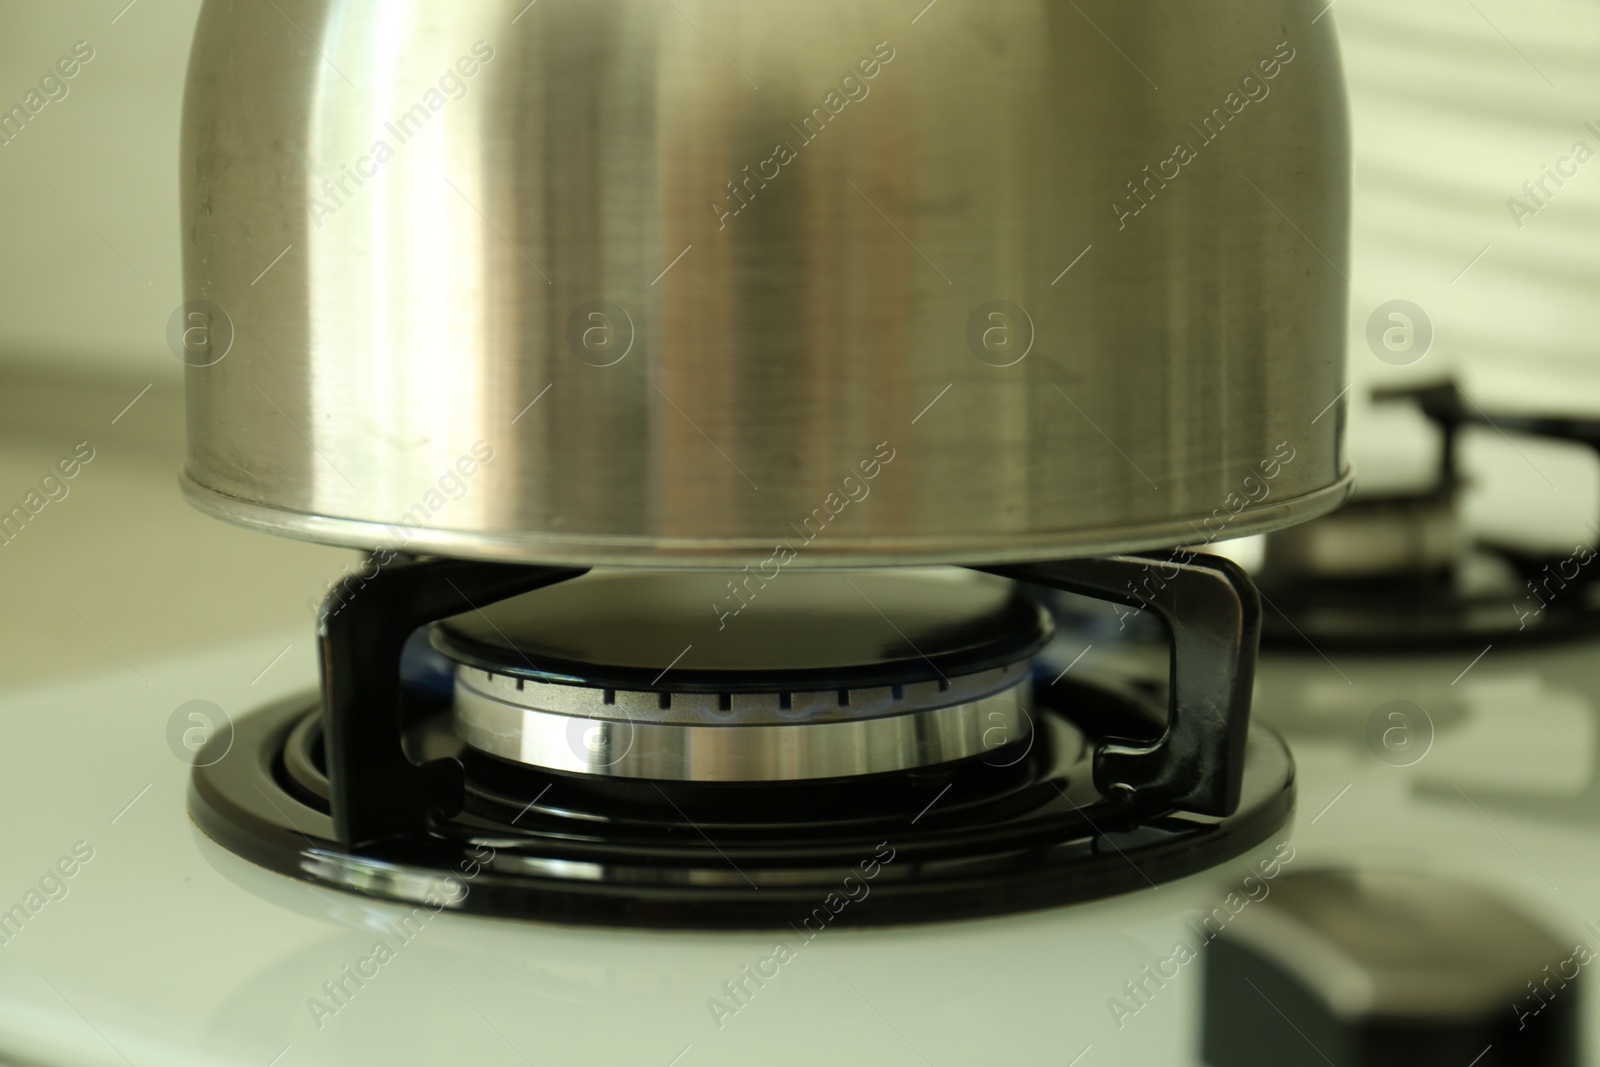 Photo of Kettle on gas burner of stove in kitchen, closeup